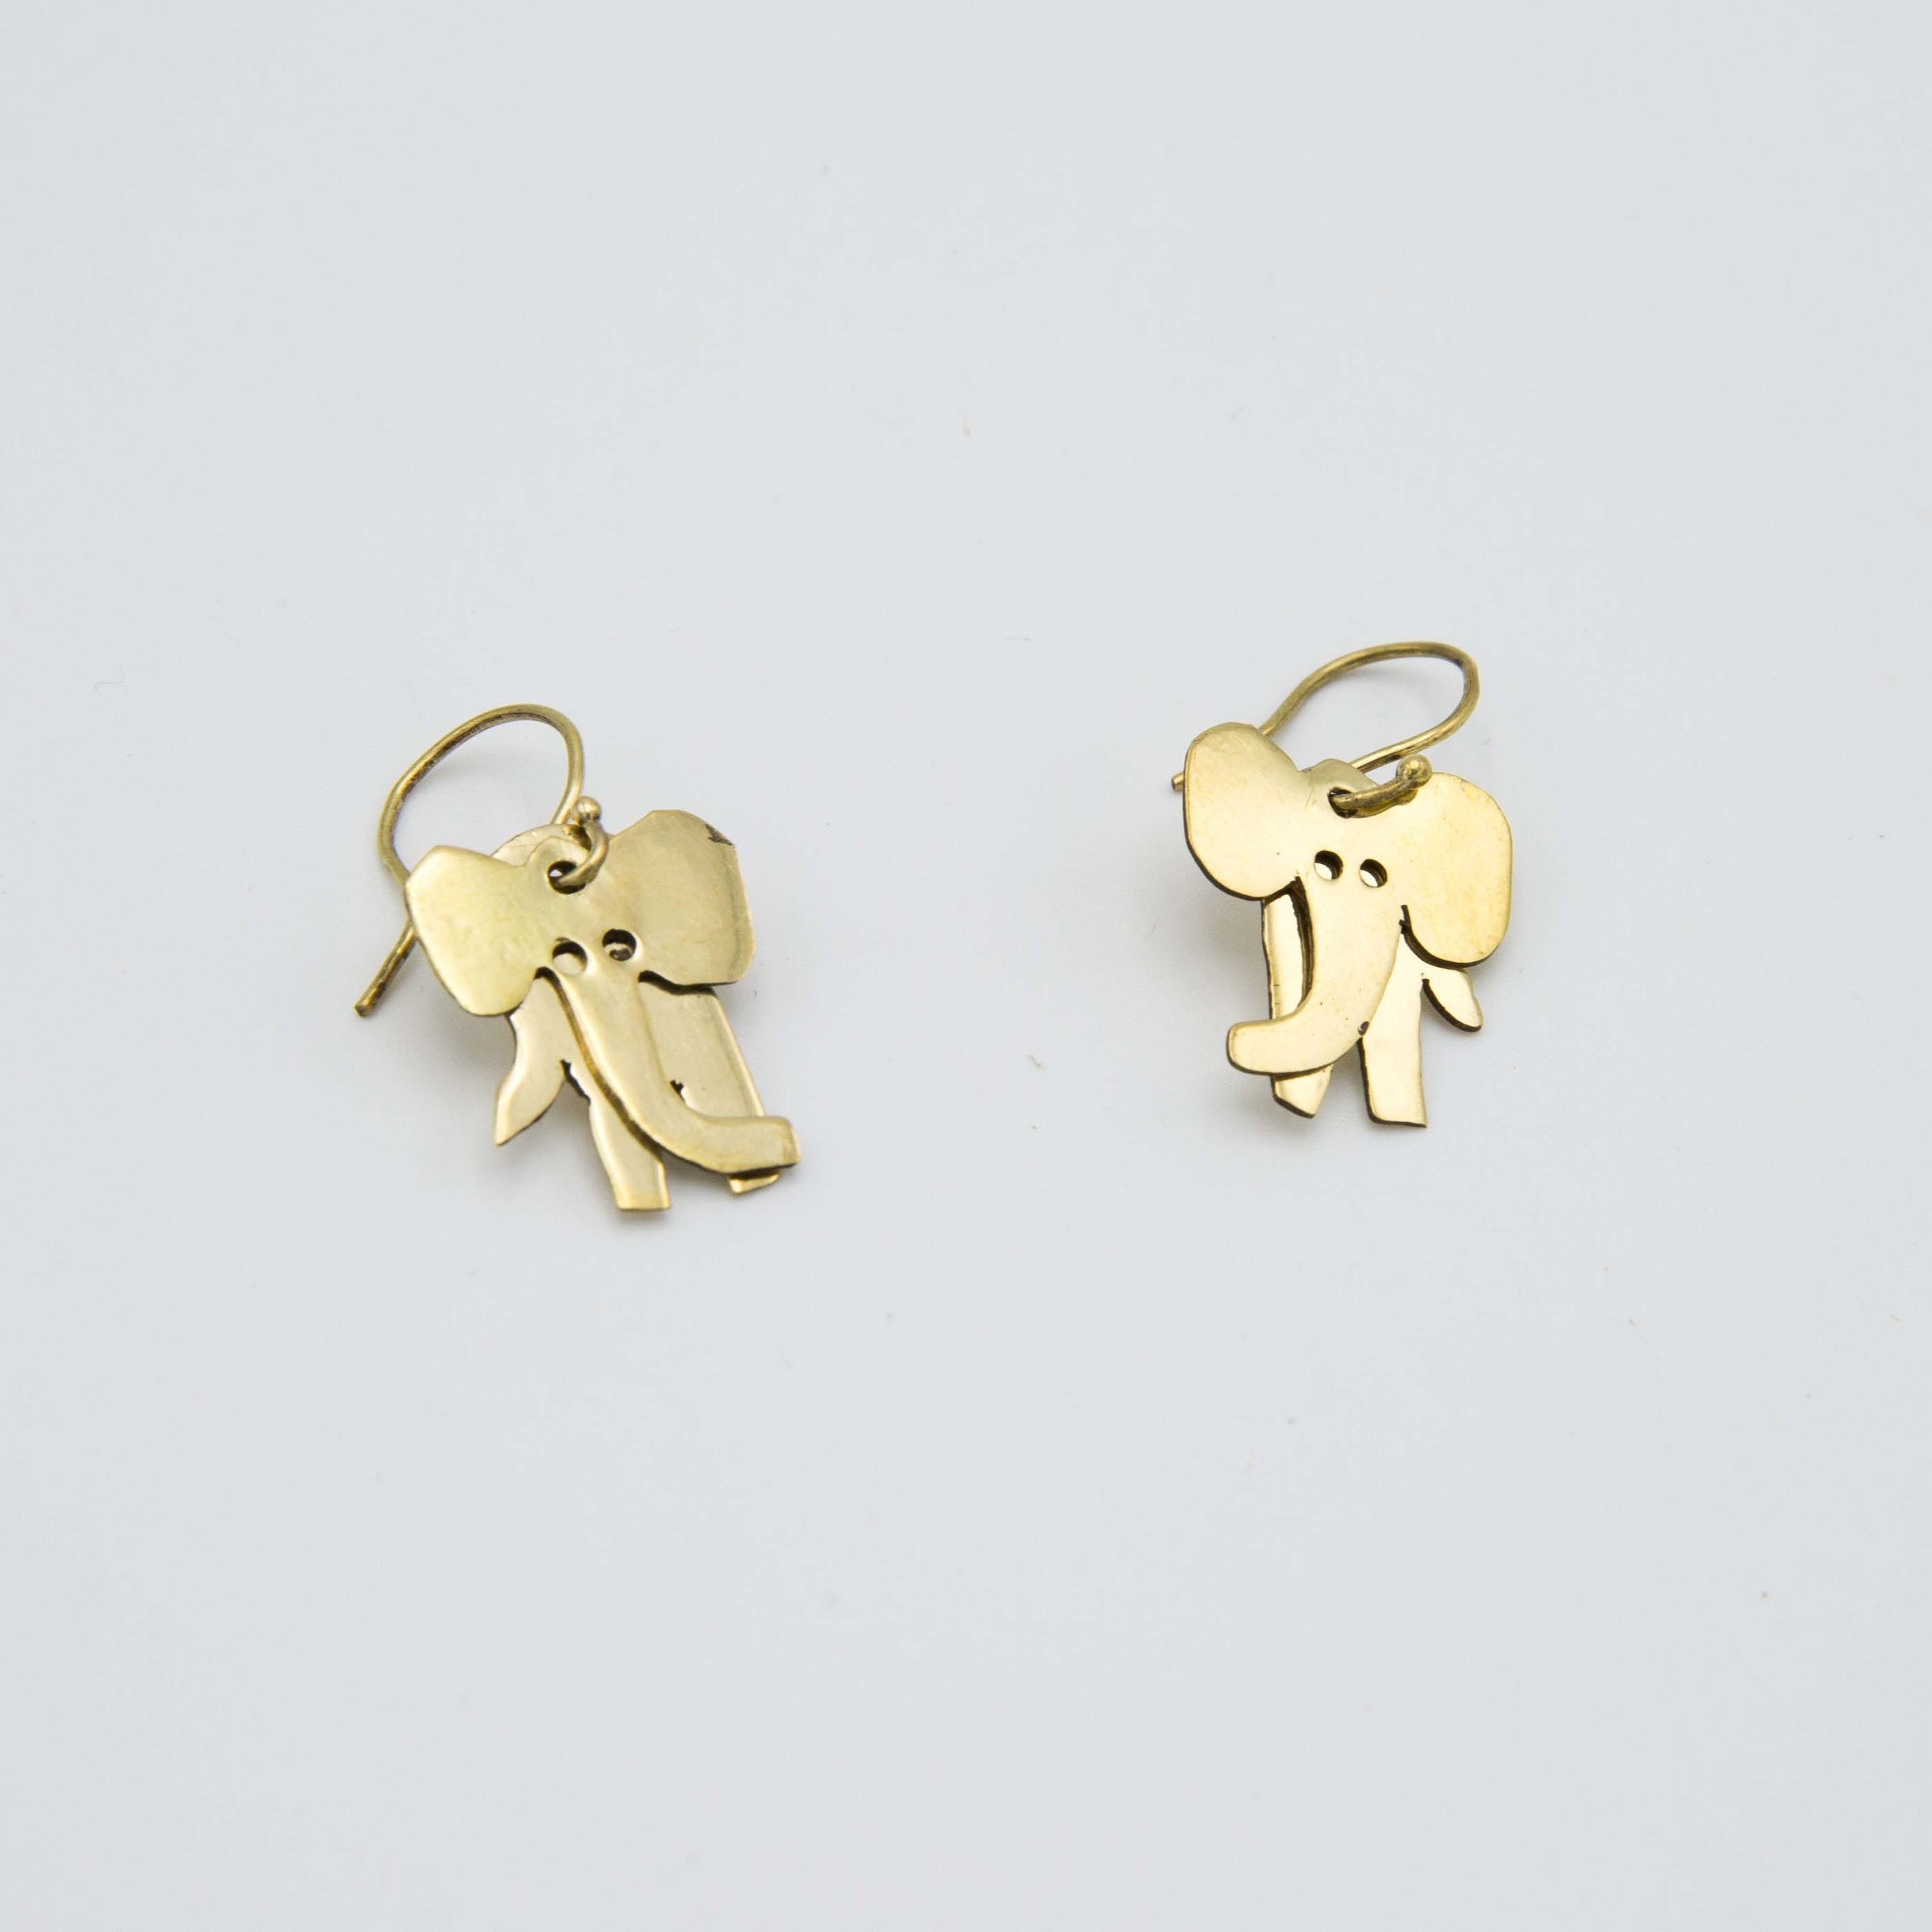 Animated Animal Earrings - Kenyan materials and design for a fair trade boutique